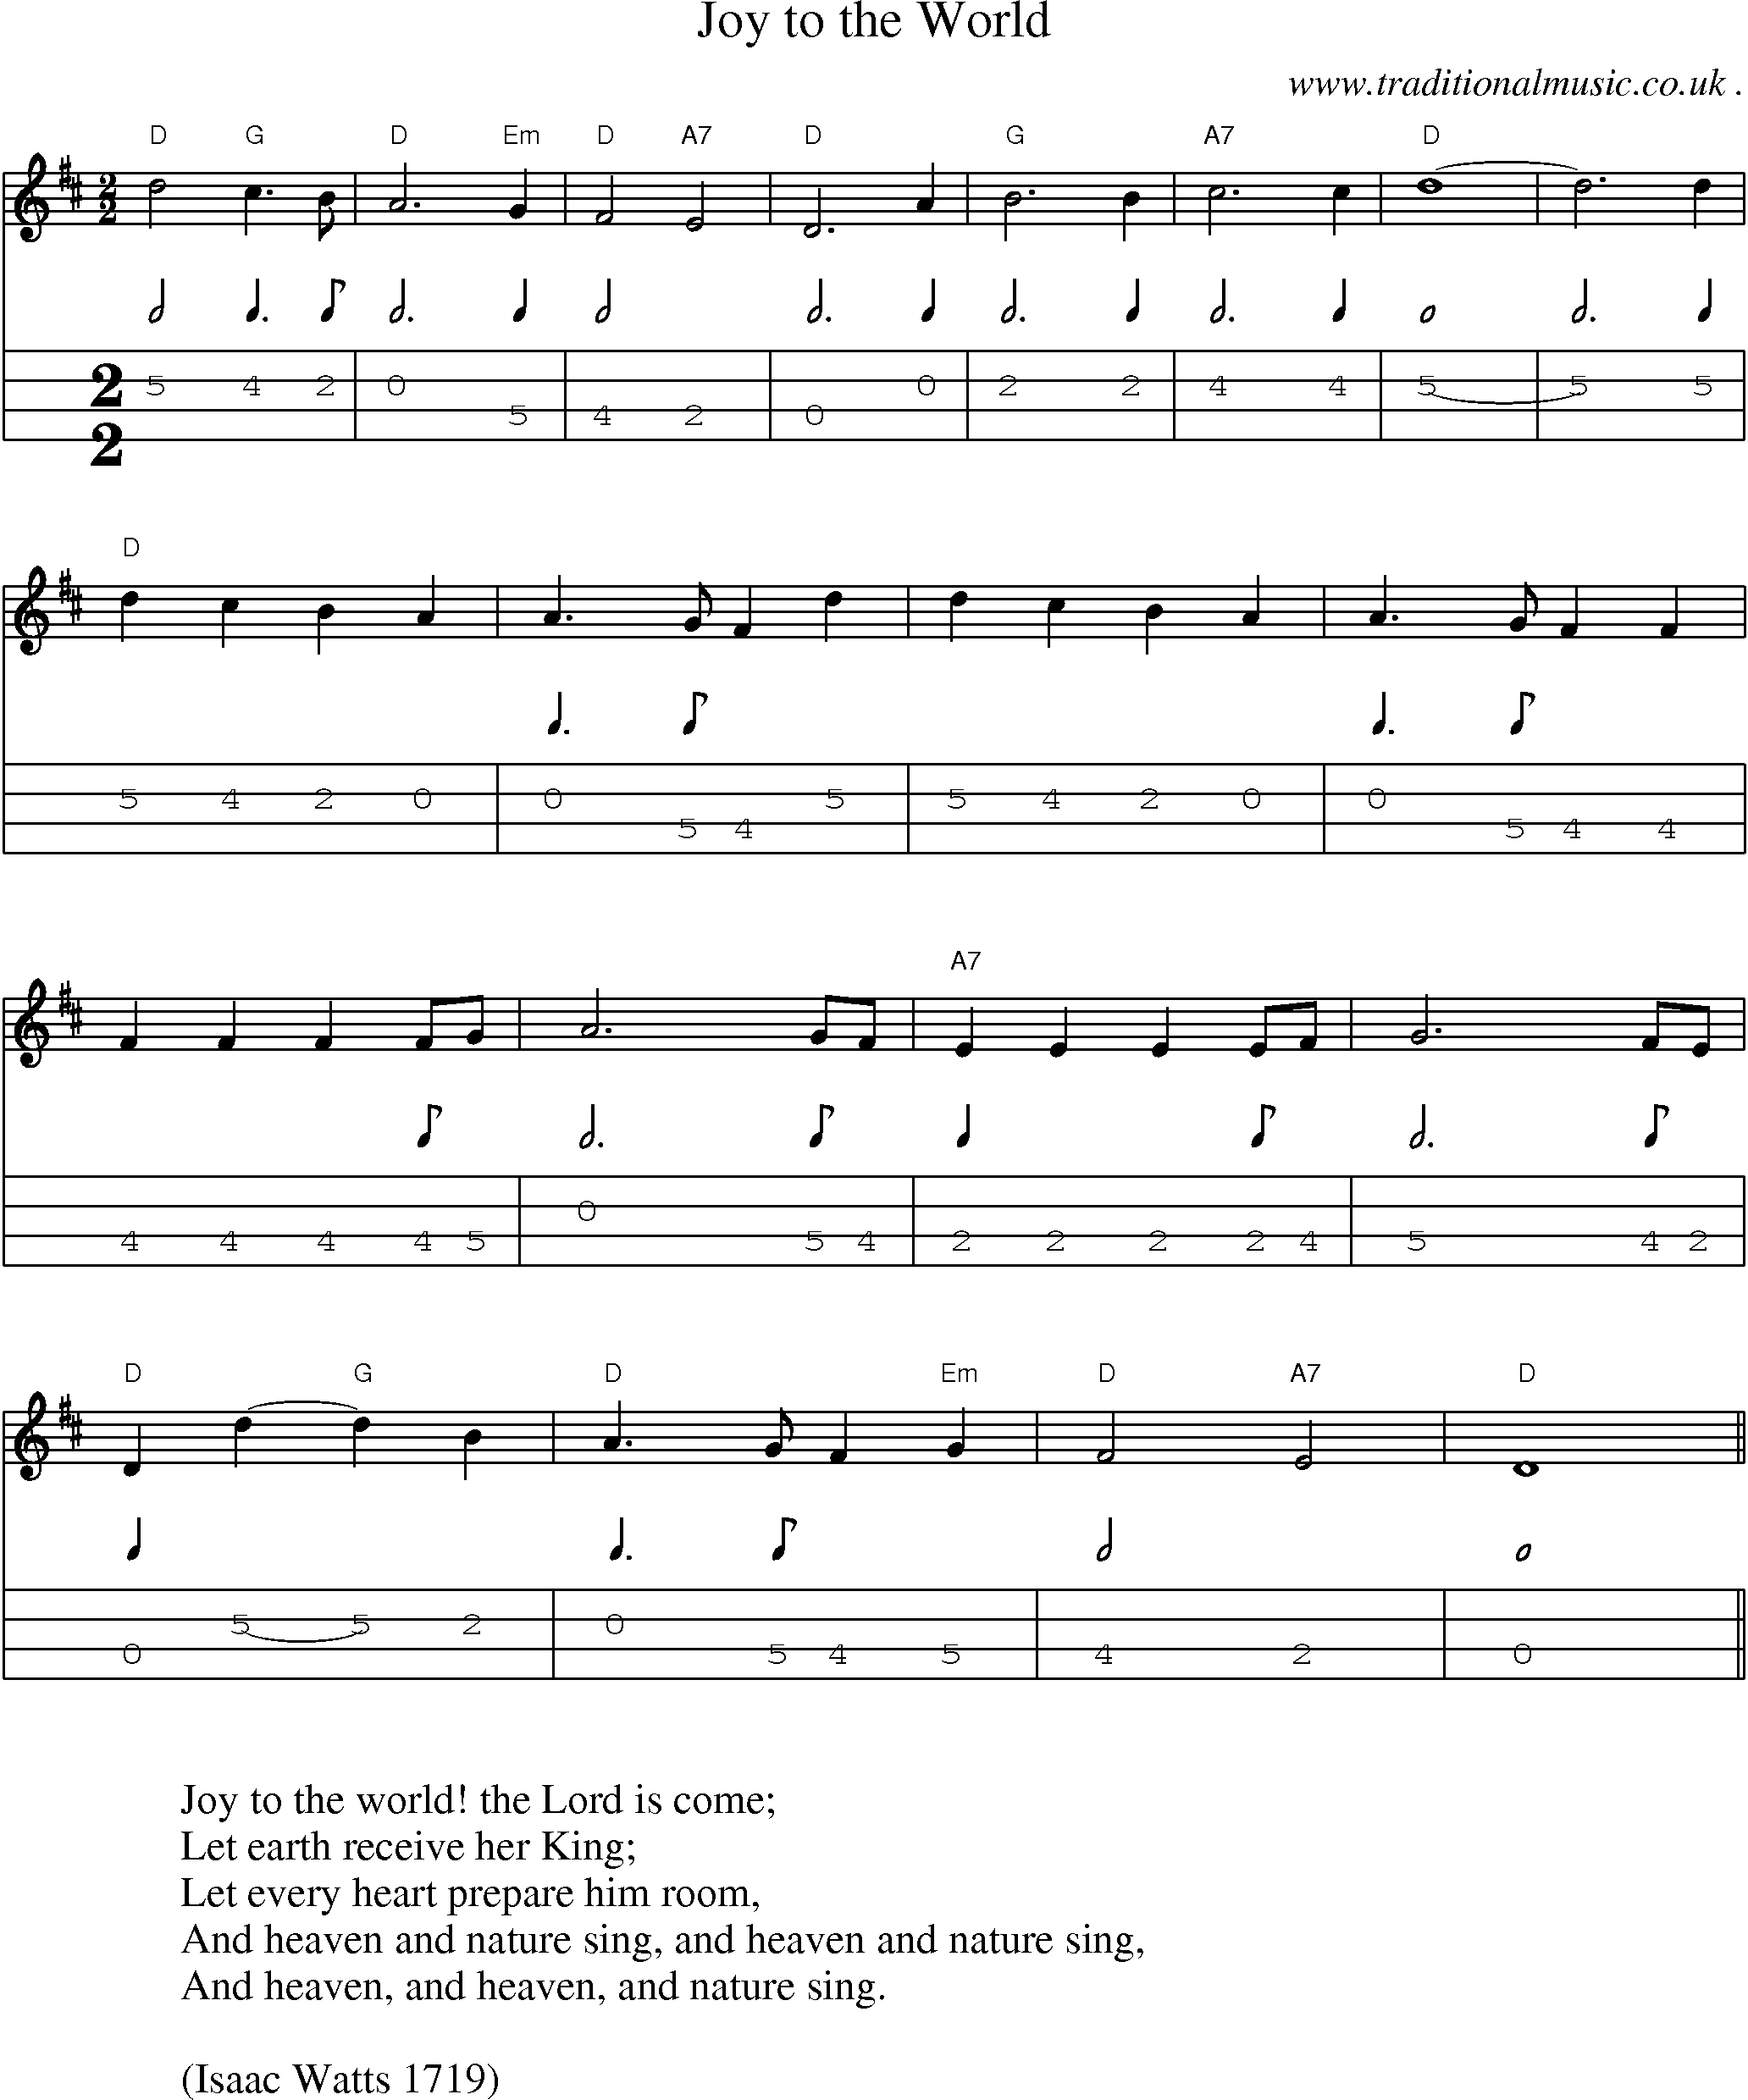 Joy To The World Chords American Old Time Music Scores And Tabs For Mandolin Joy To The World